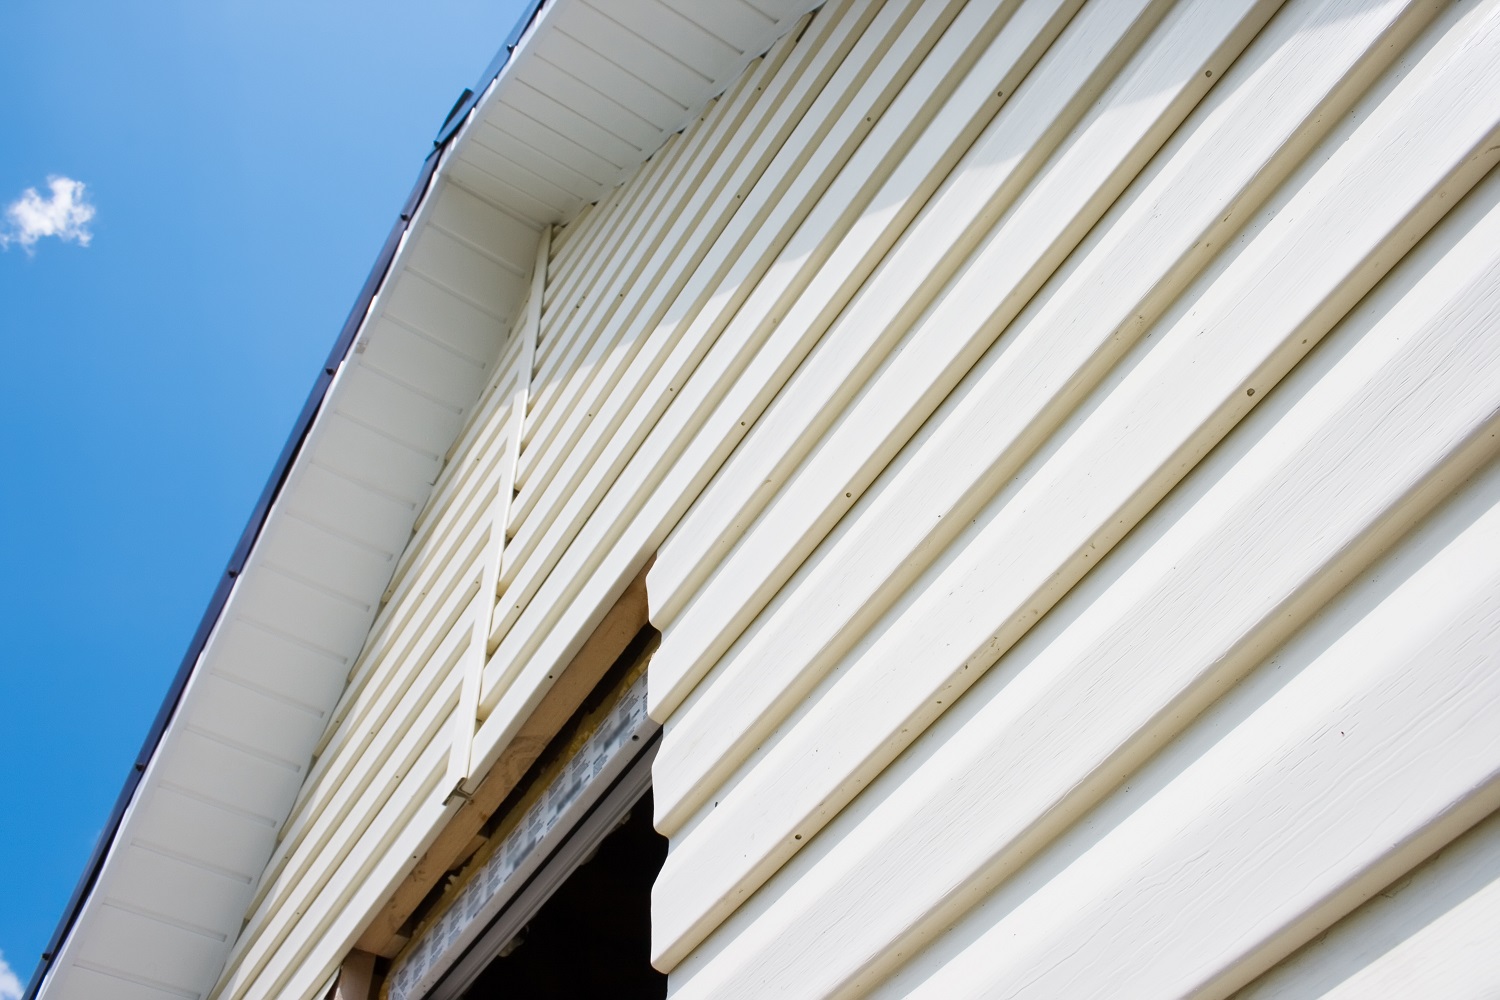 Hardieplank vs. Vinyl Siding: Which One Should You Choose?